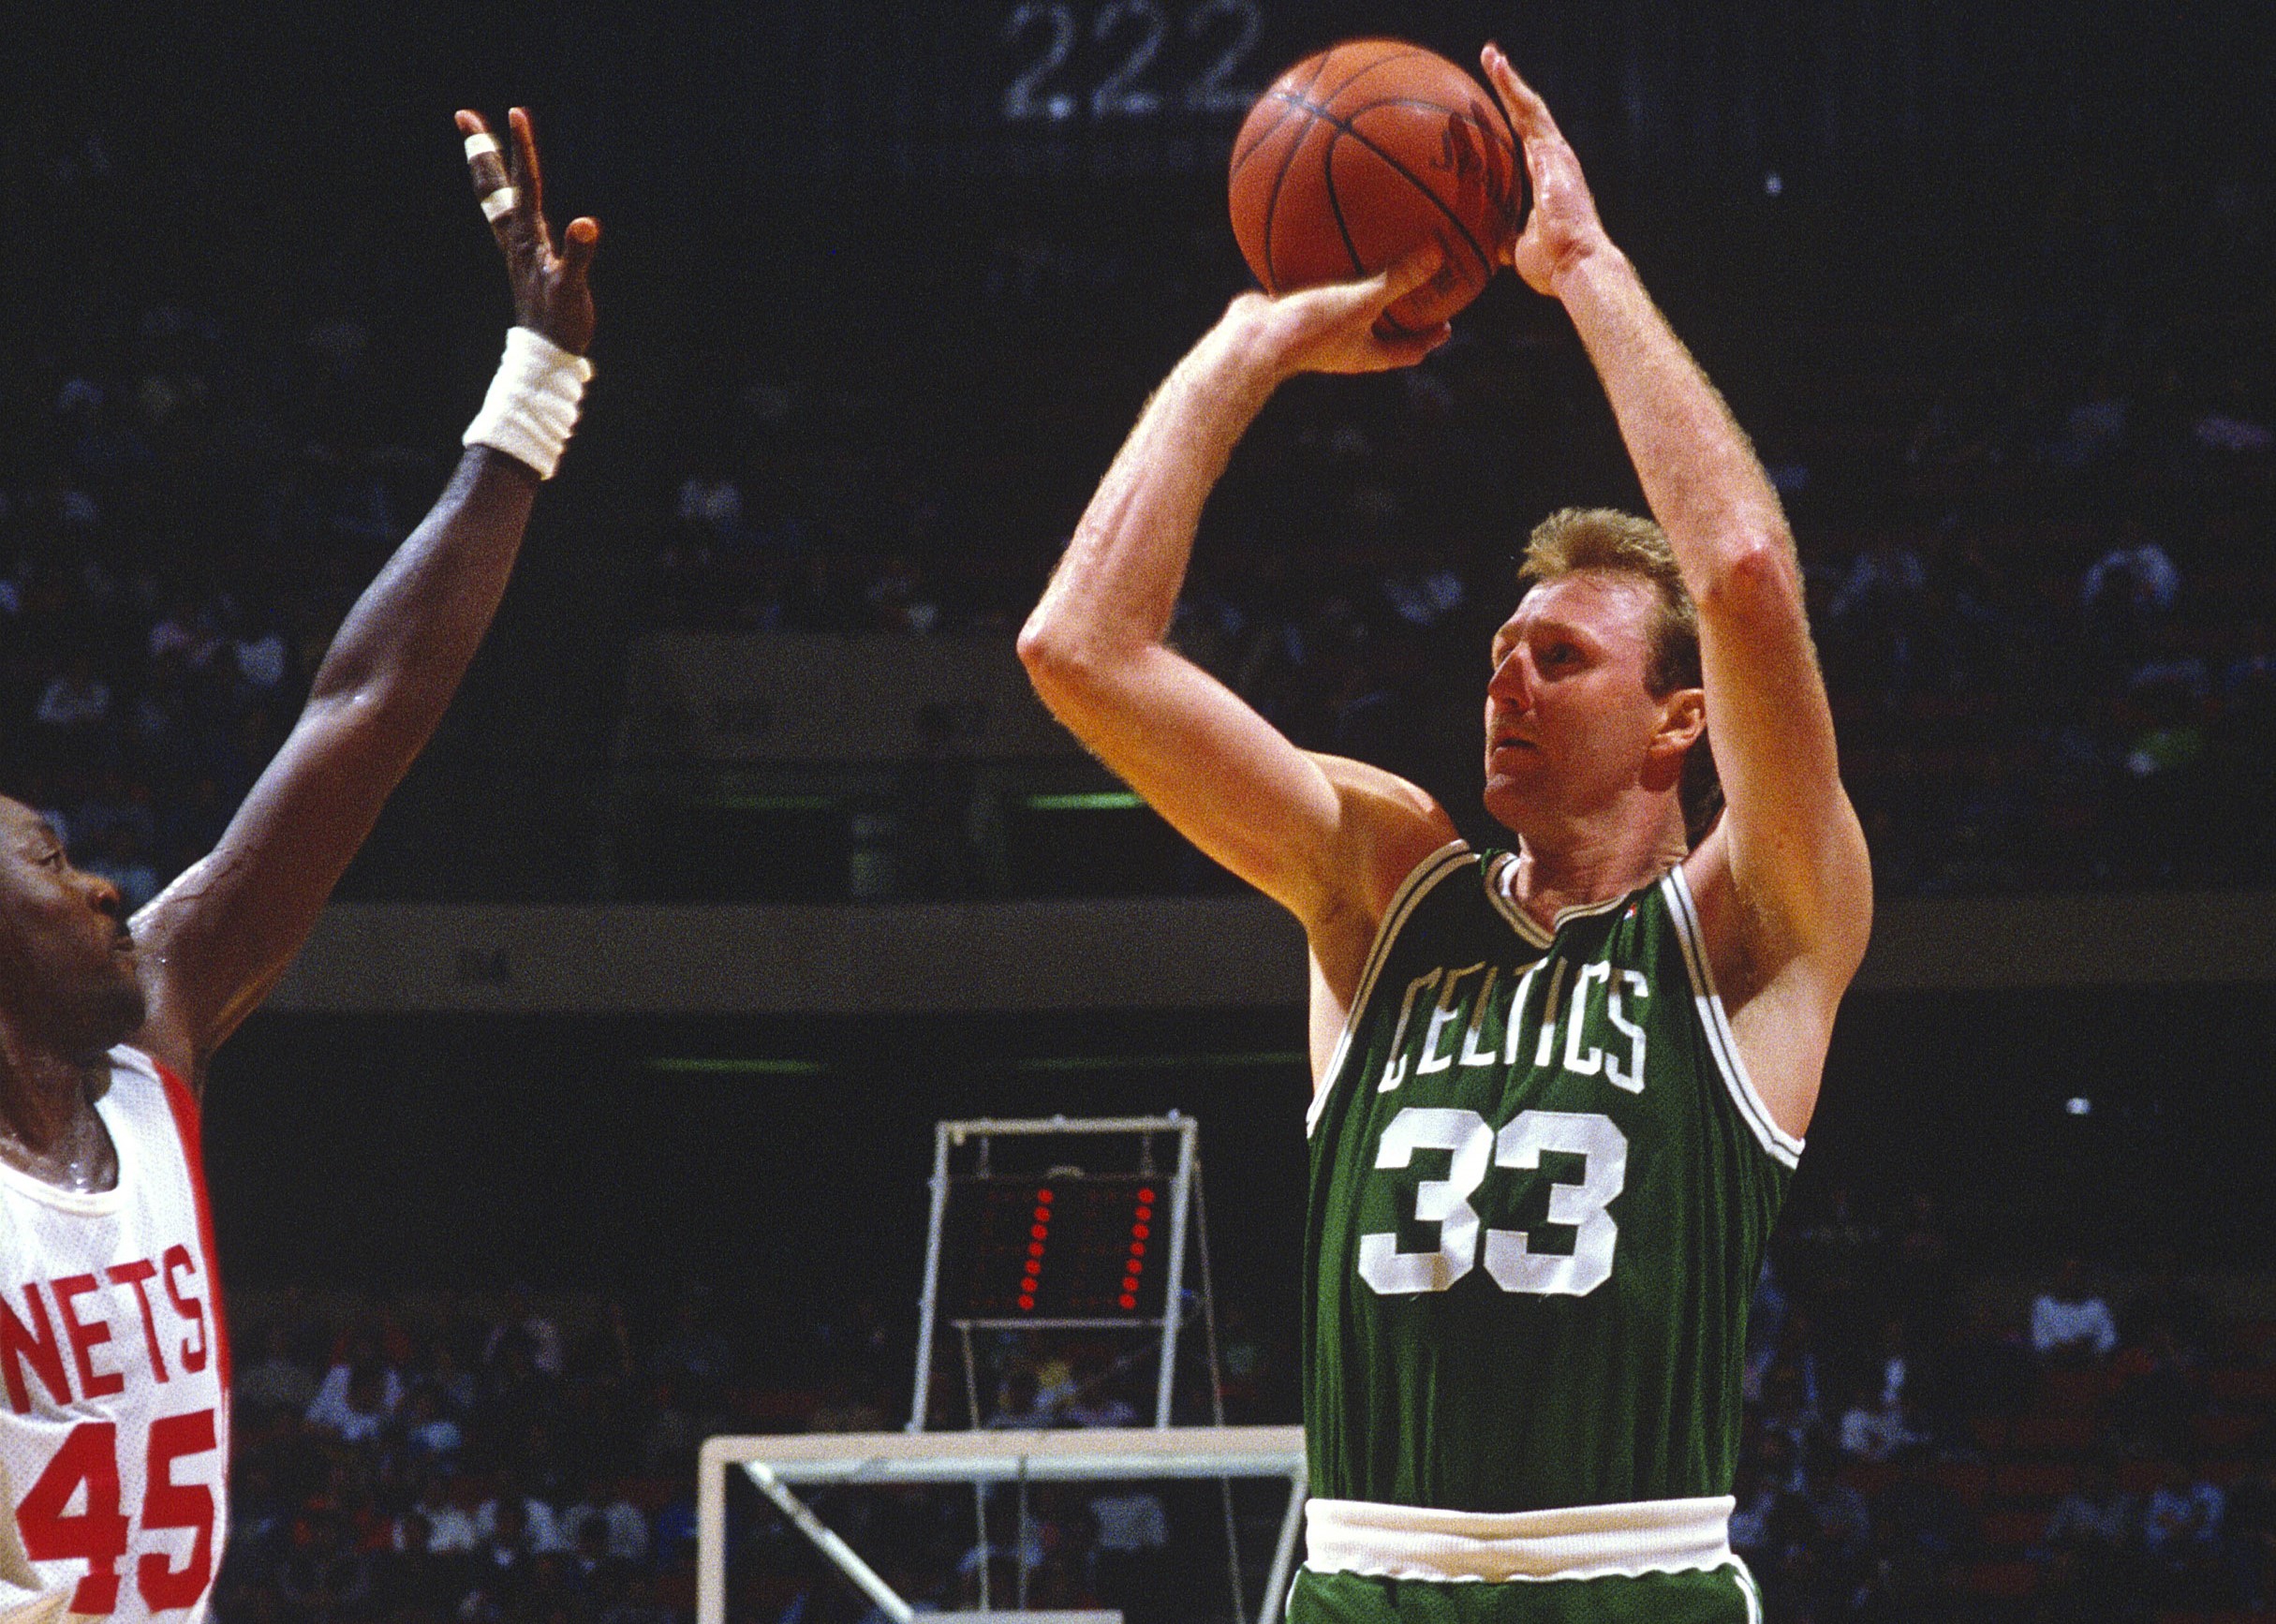 Larry Bird of the Boston Celtics shoot over Purvis Short of the New Jersey Nets.